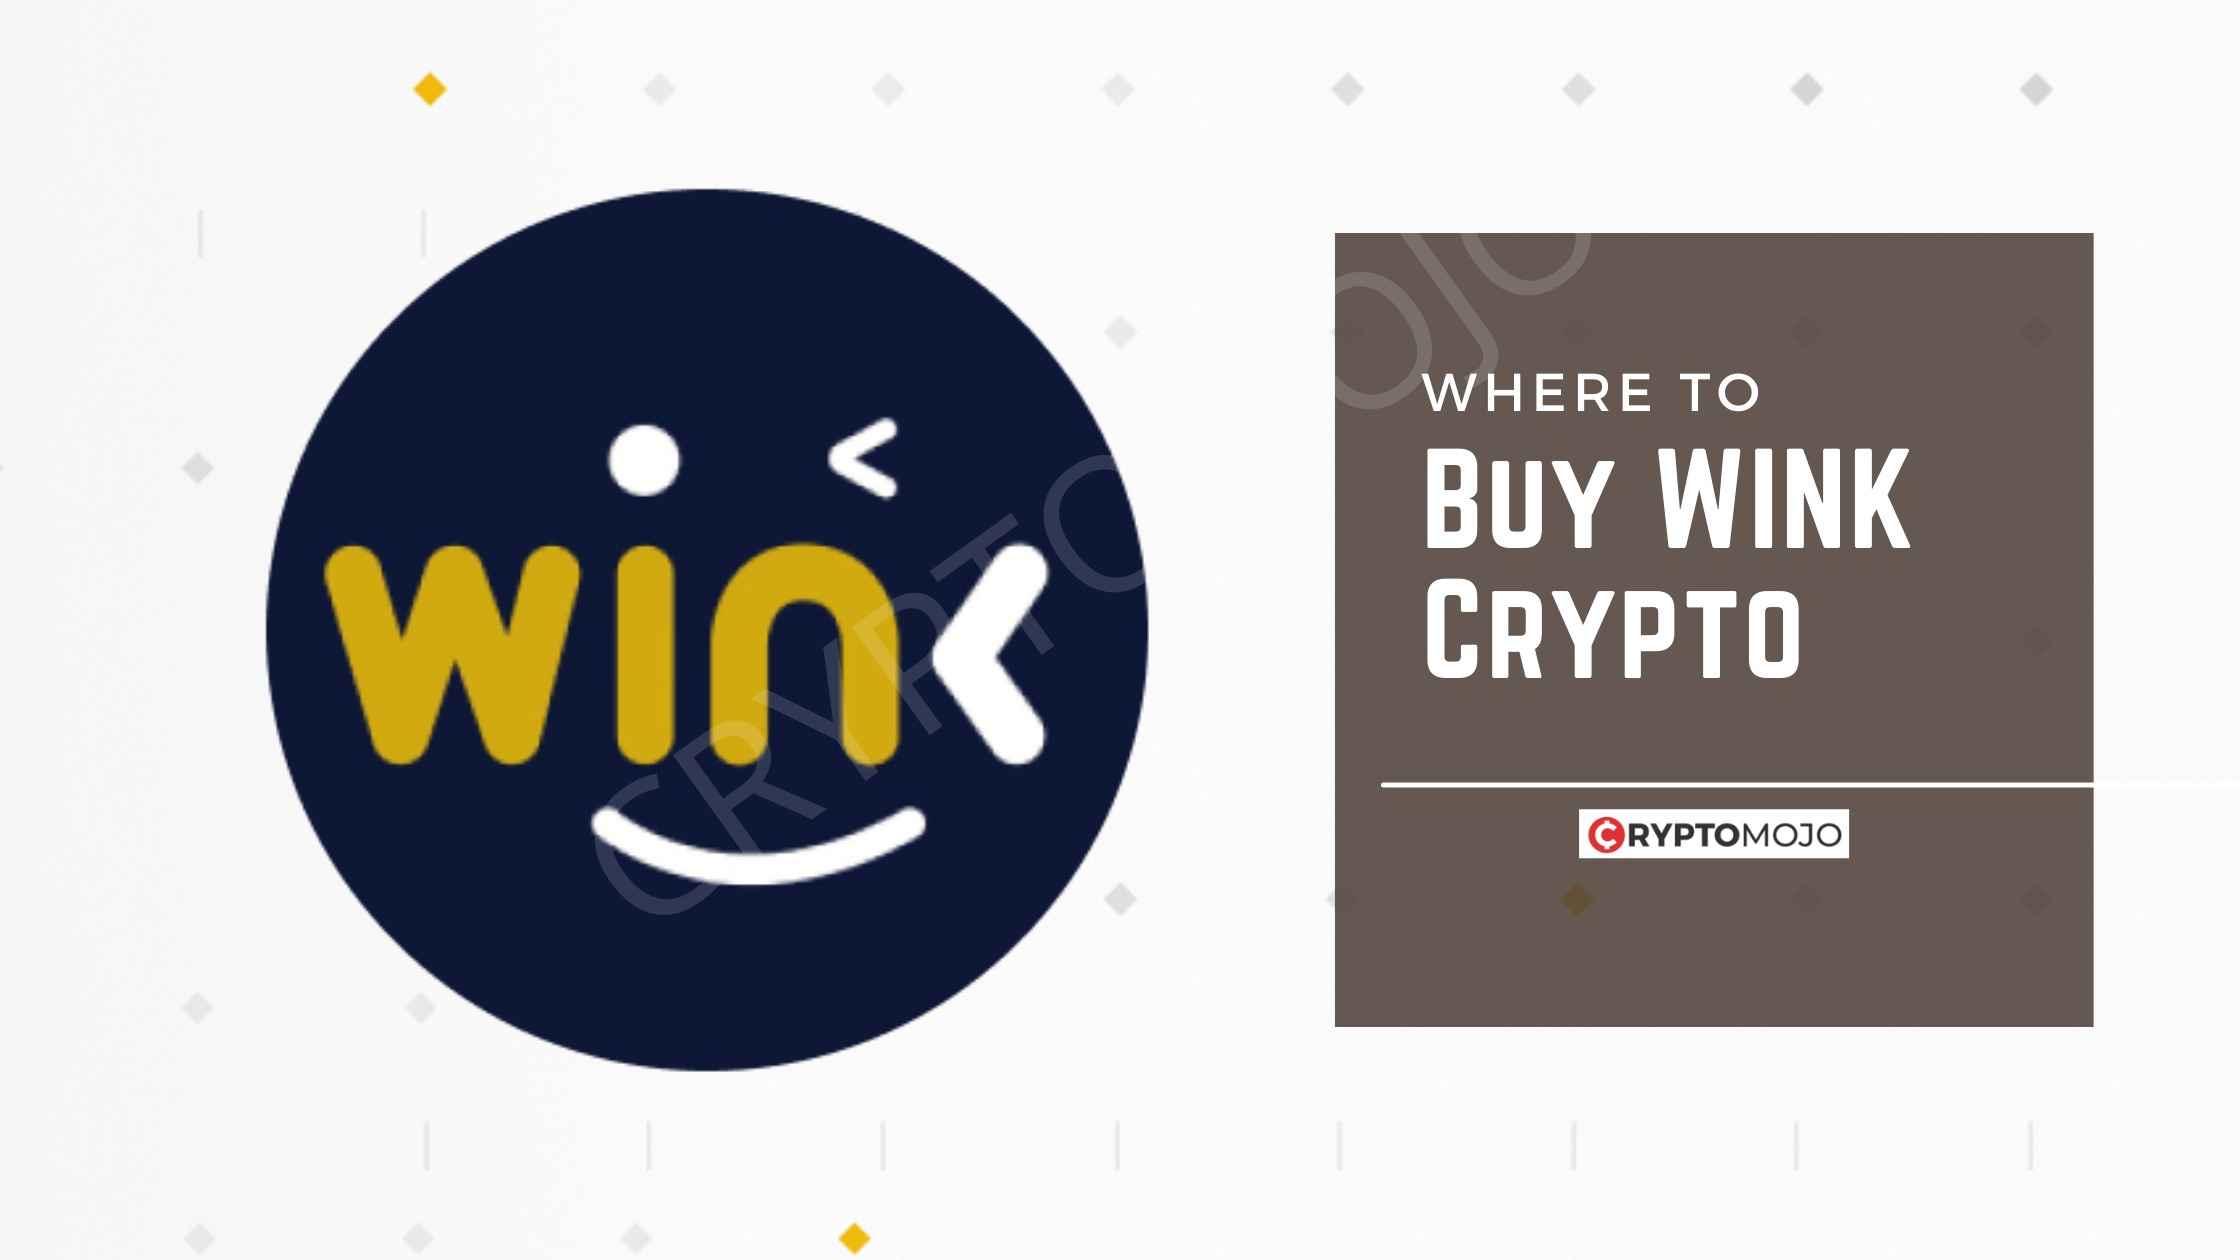 Where To Buy WINK Crypto